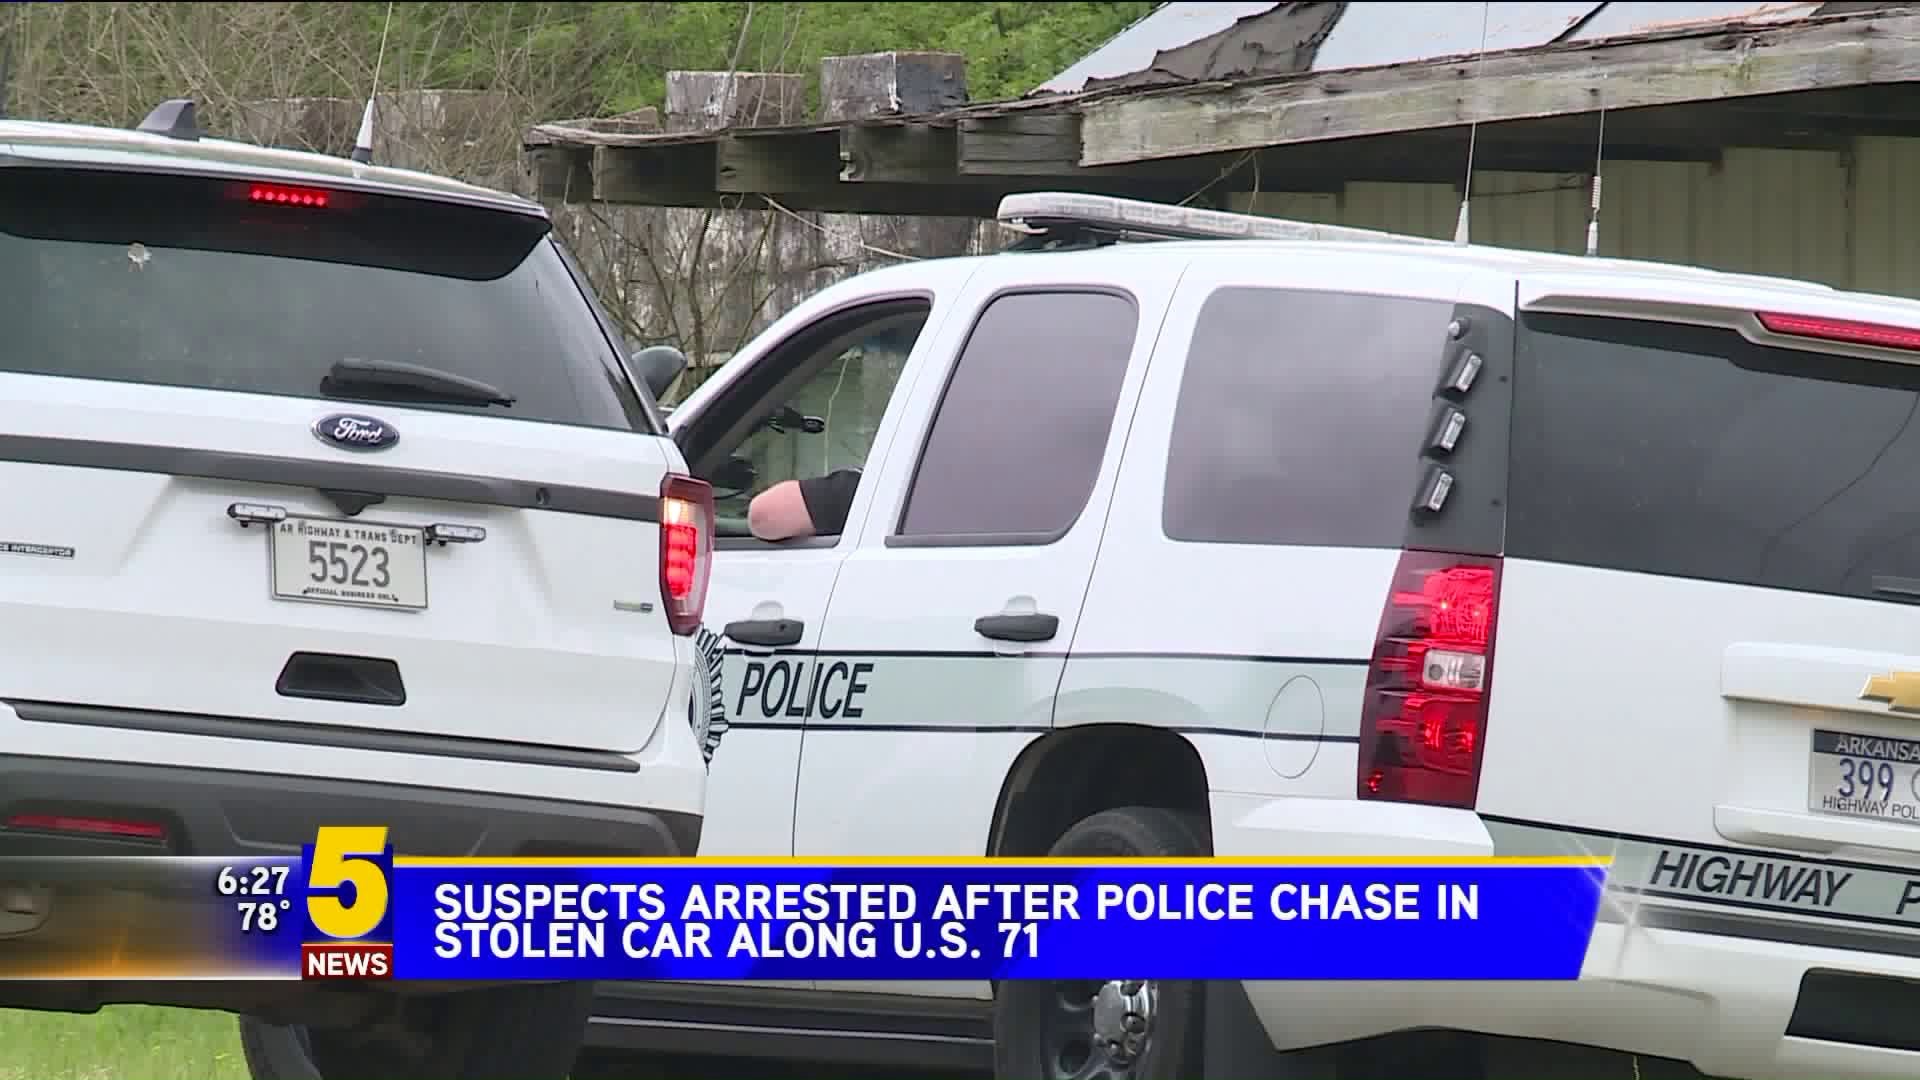 Suspects Arrested After Police Chase in Stolen Car